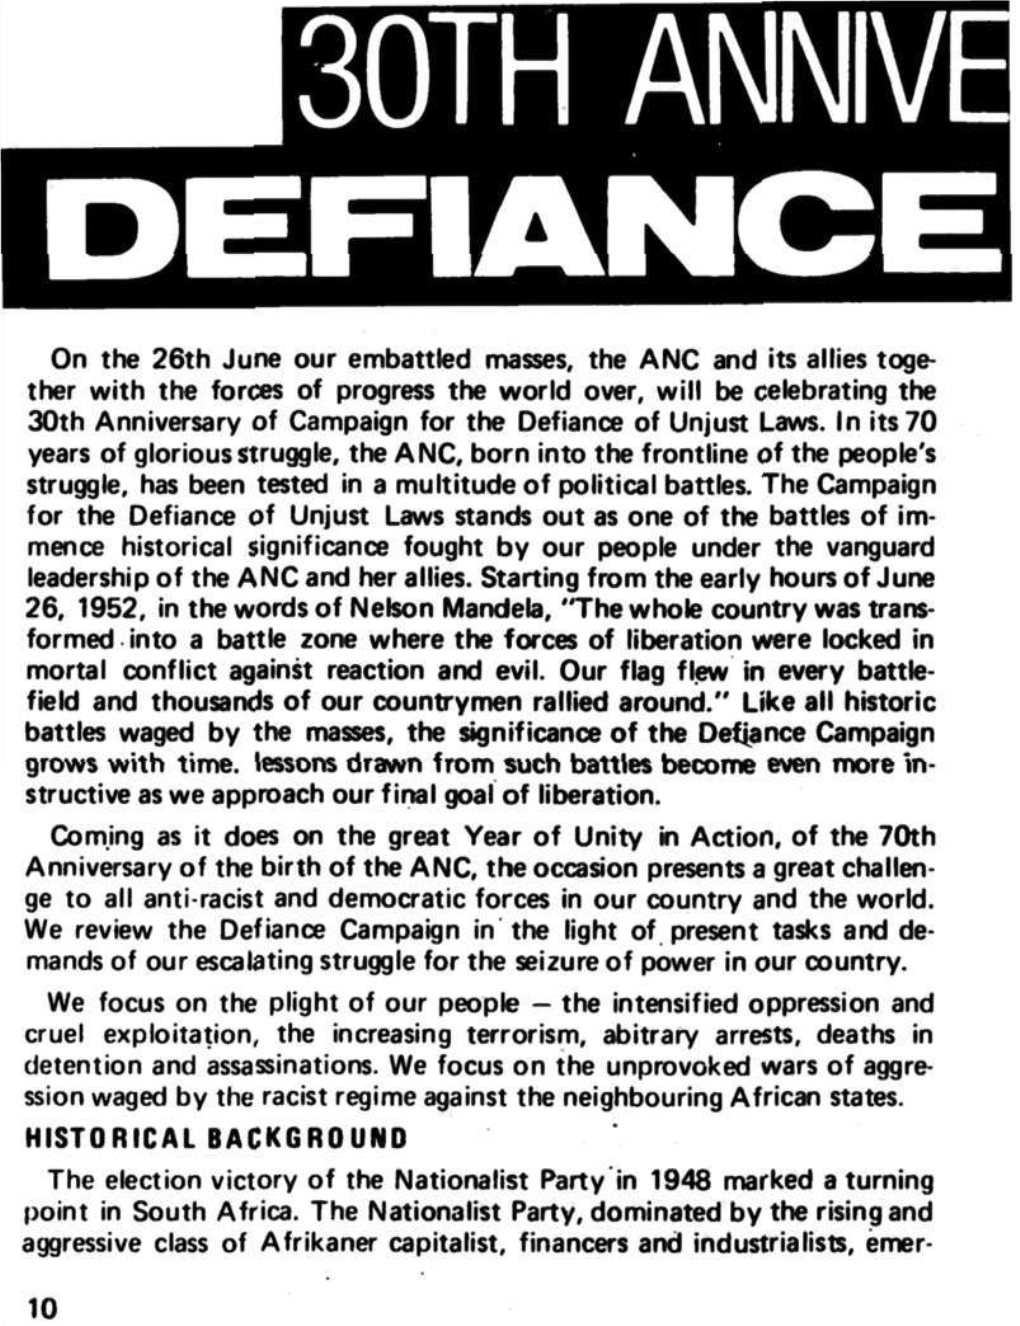 On the 26Th June Our Embattled Masses, the ANC and Its Allies Toge